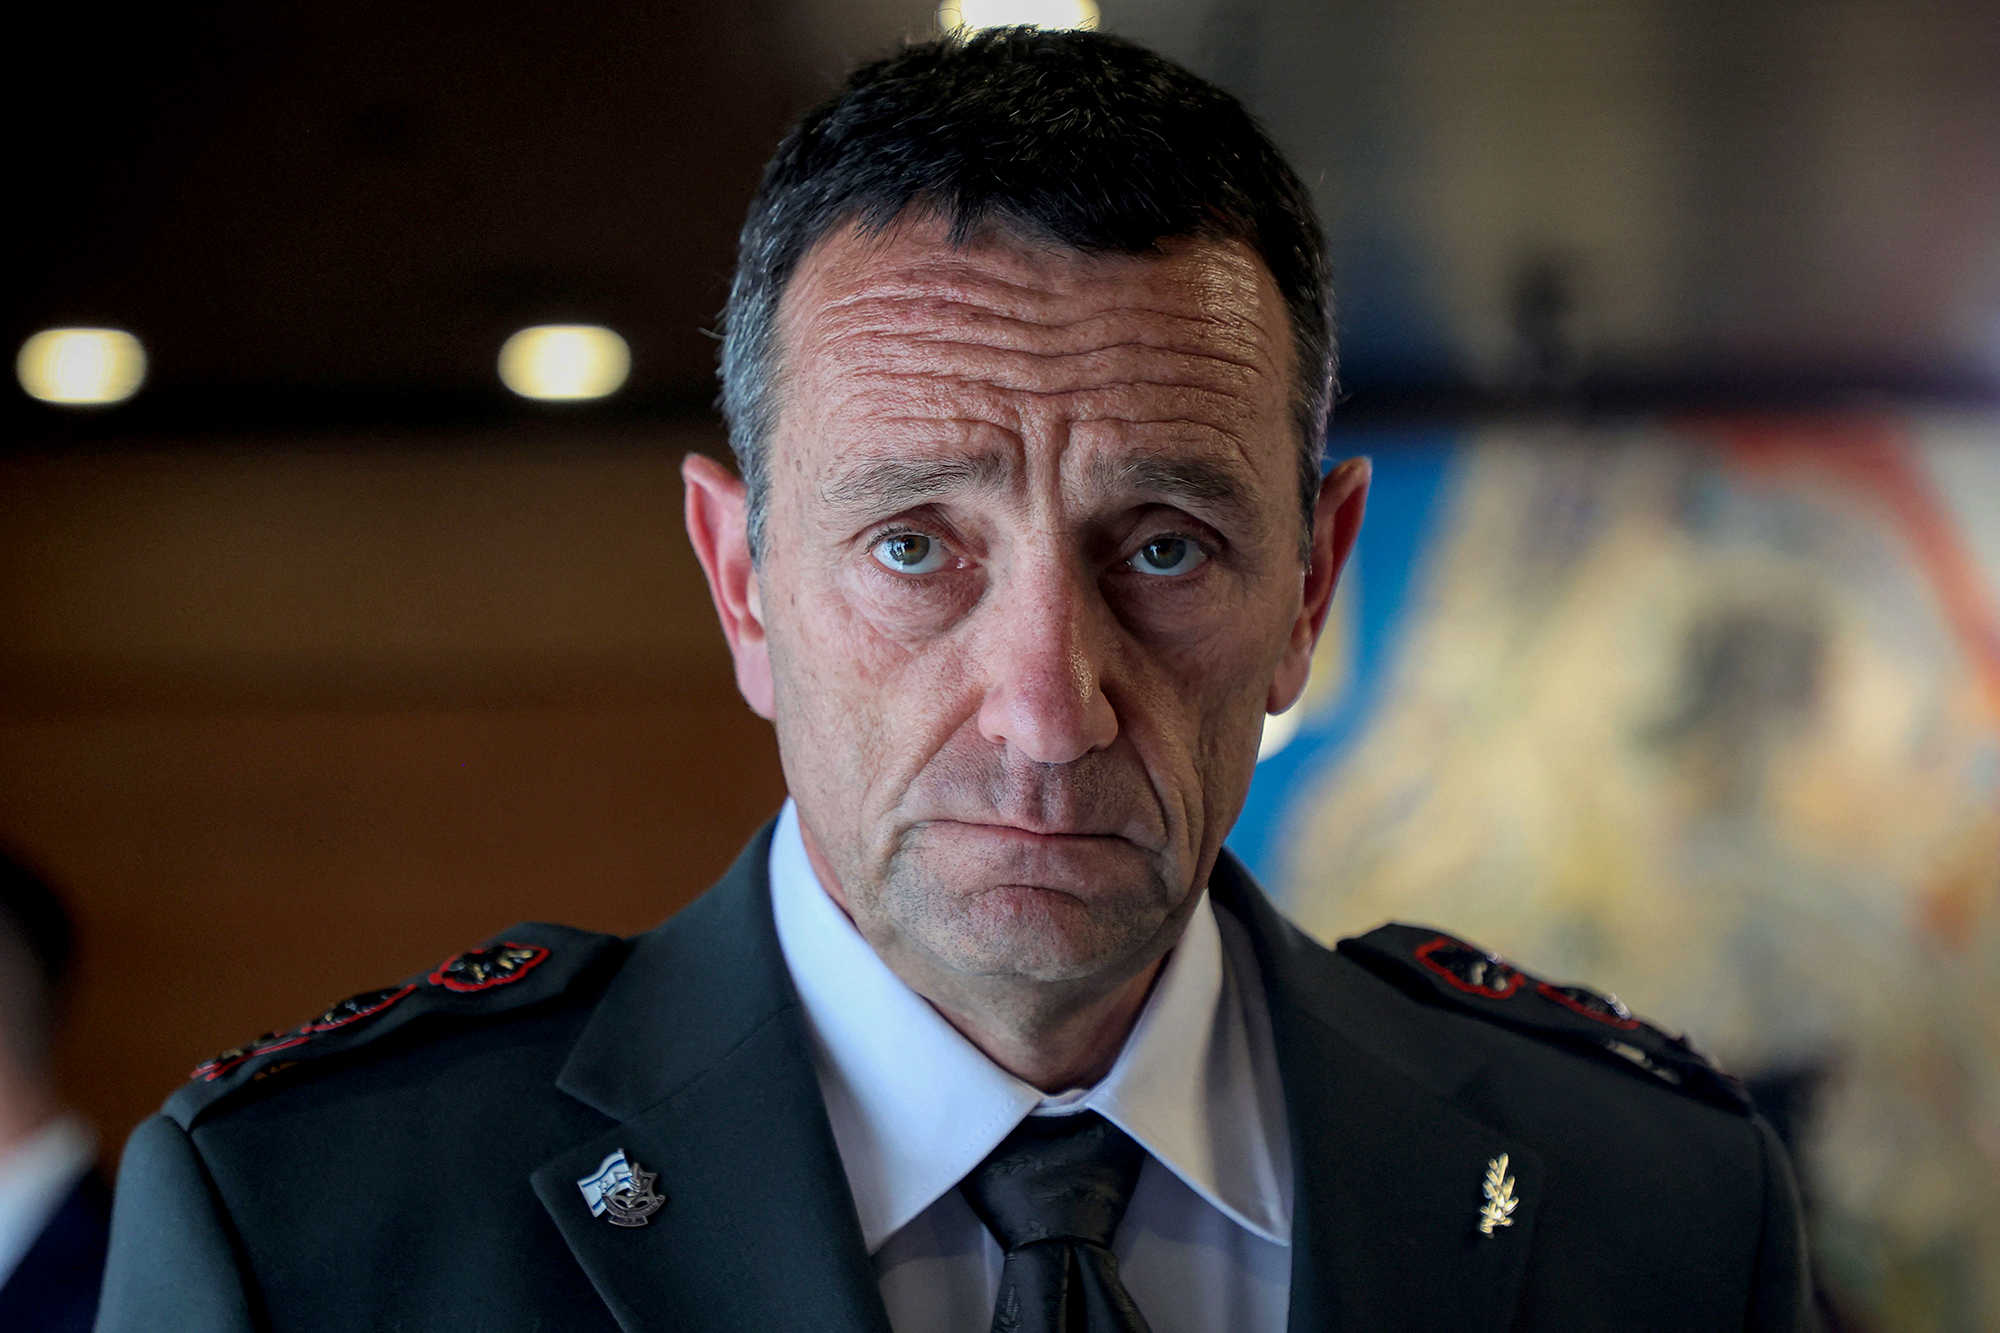 Herzi Halevi, chief of general staff of the Israeli army, looks on before a meeting in March 2023.